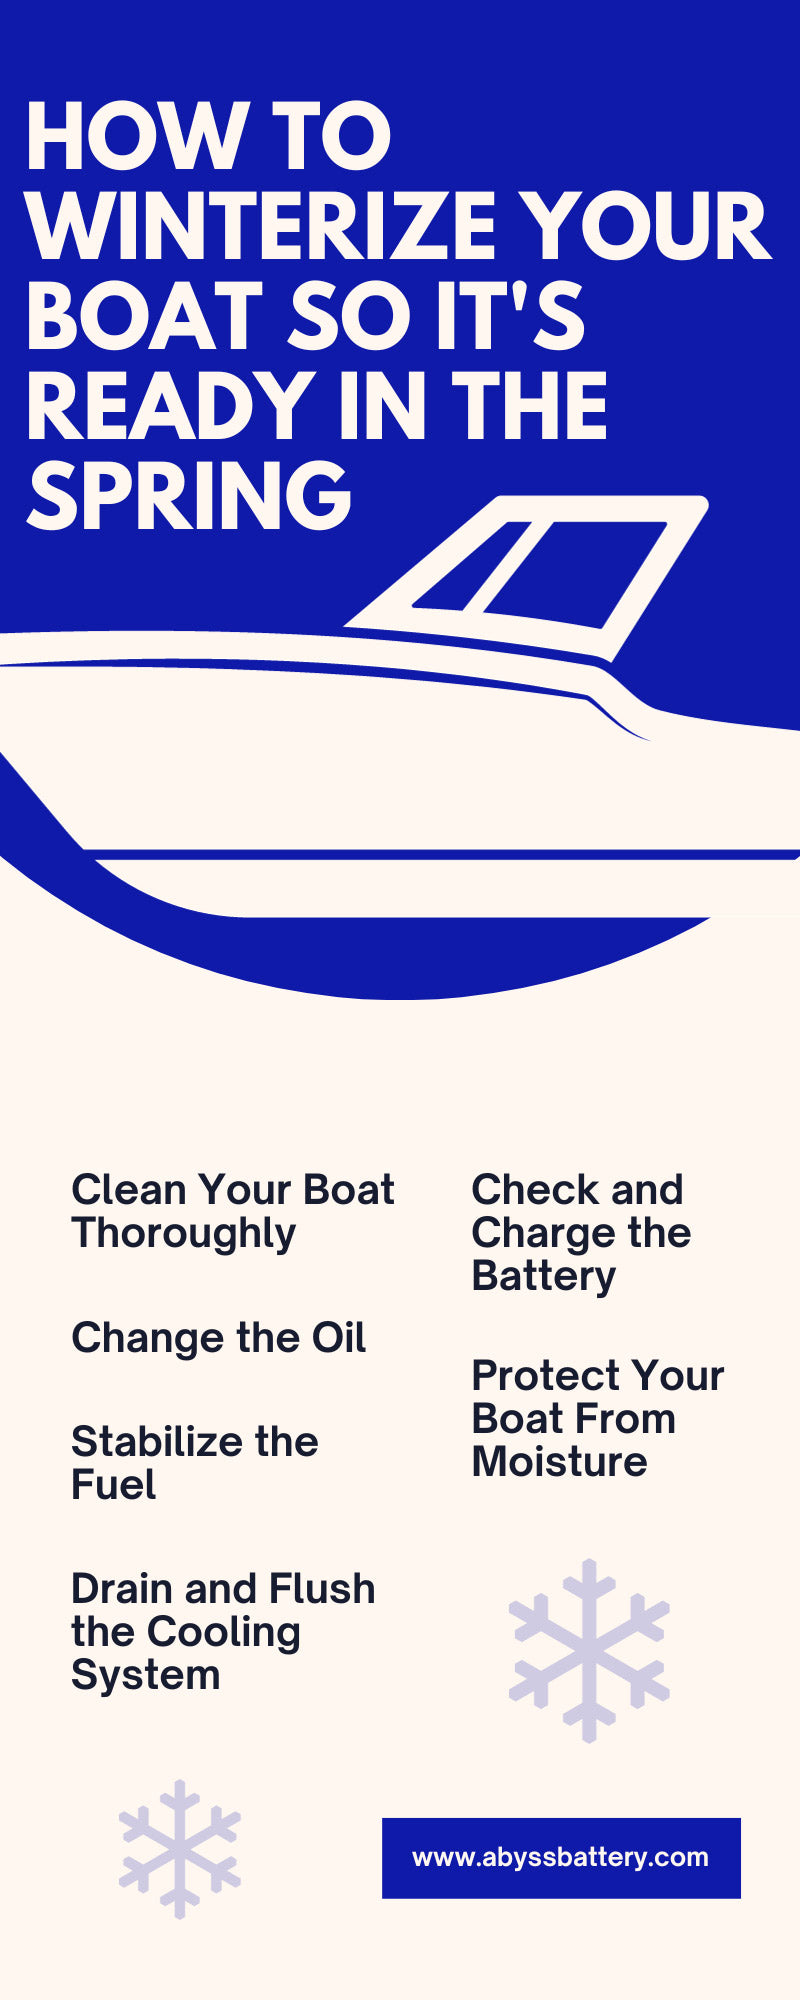 How To Winterize Your Boat So It's Ready in the Spring